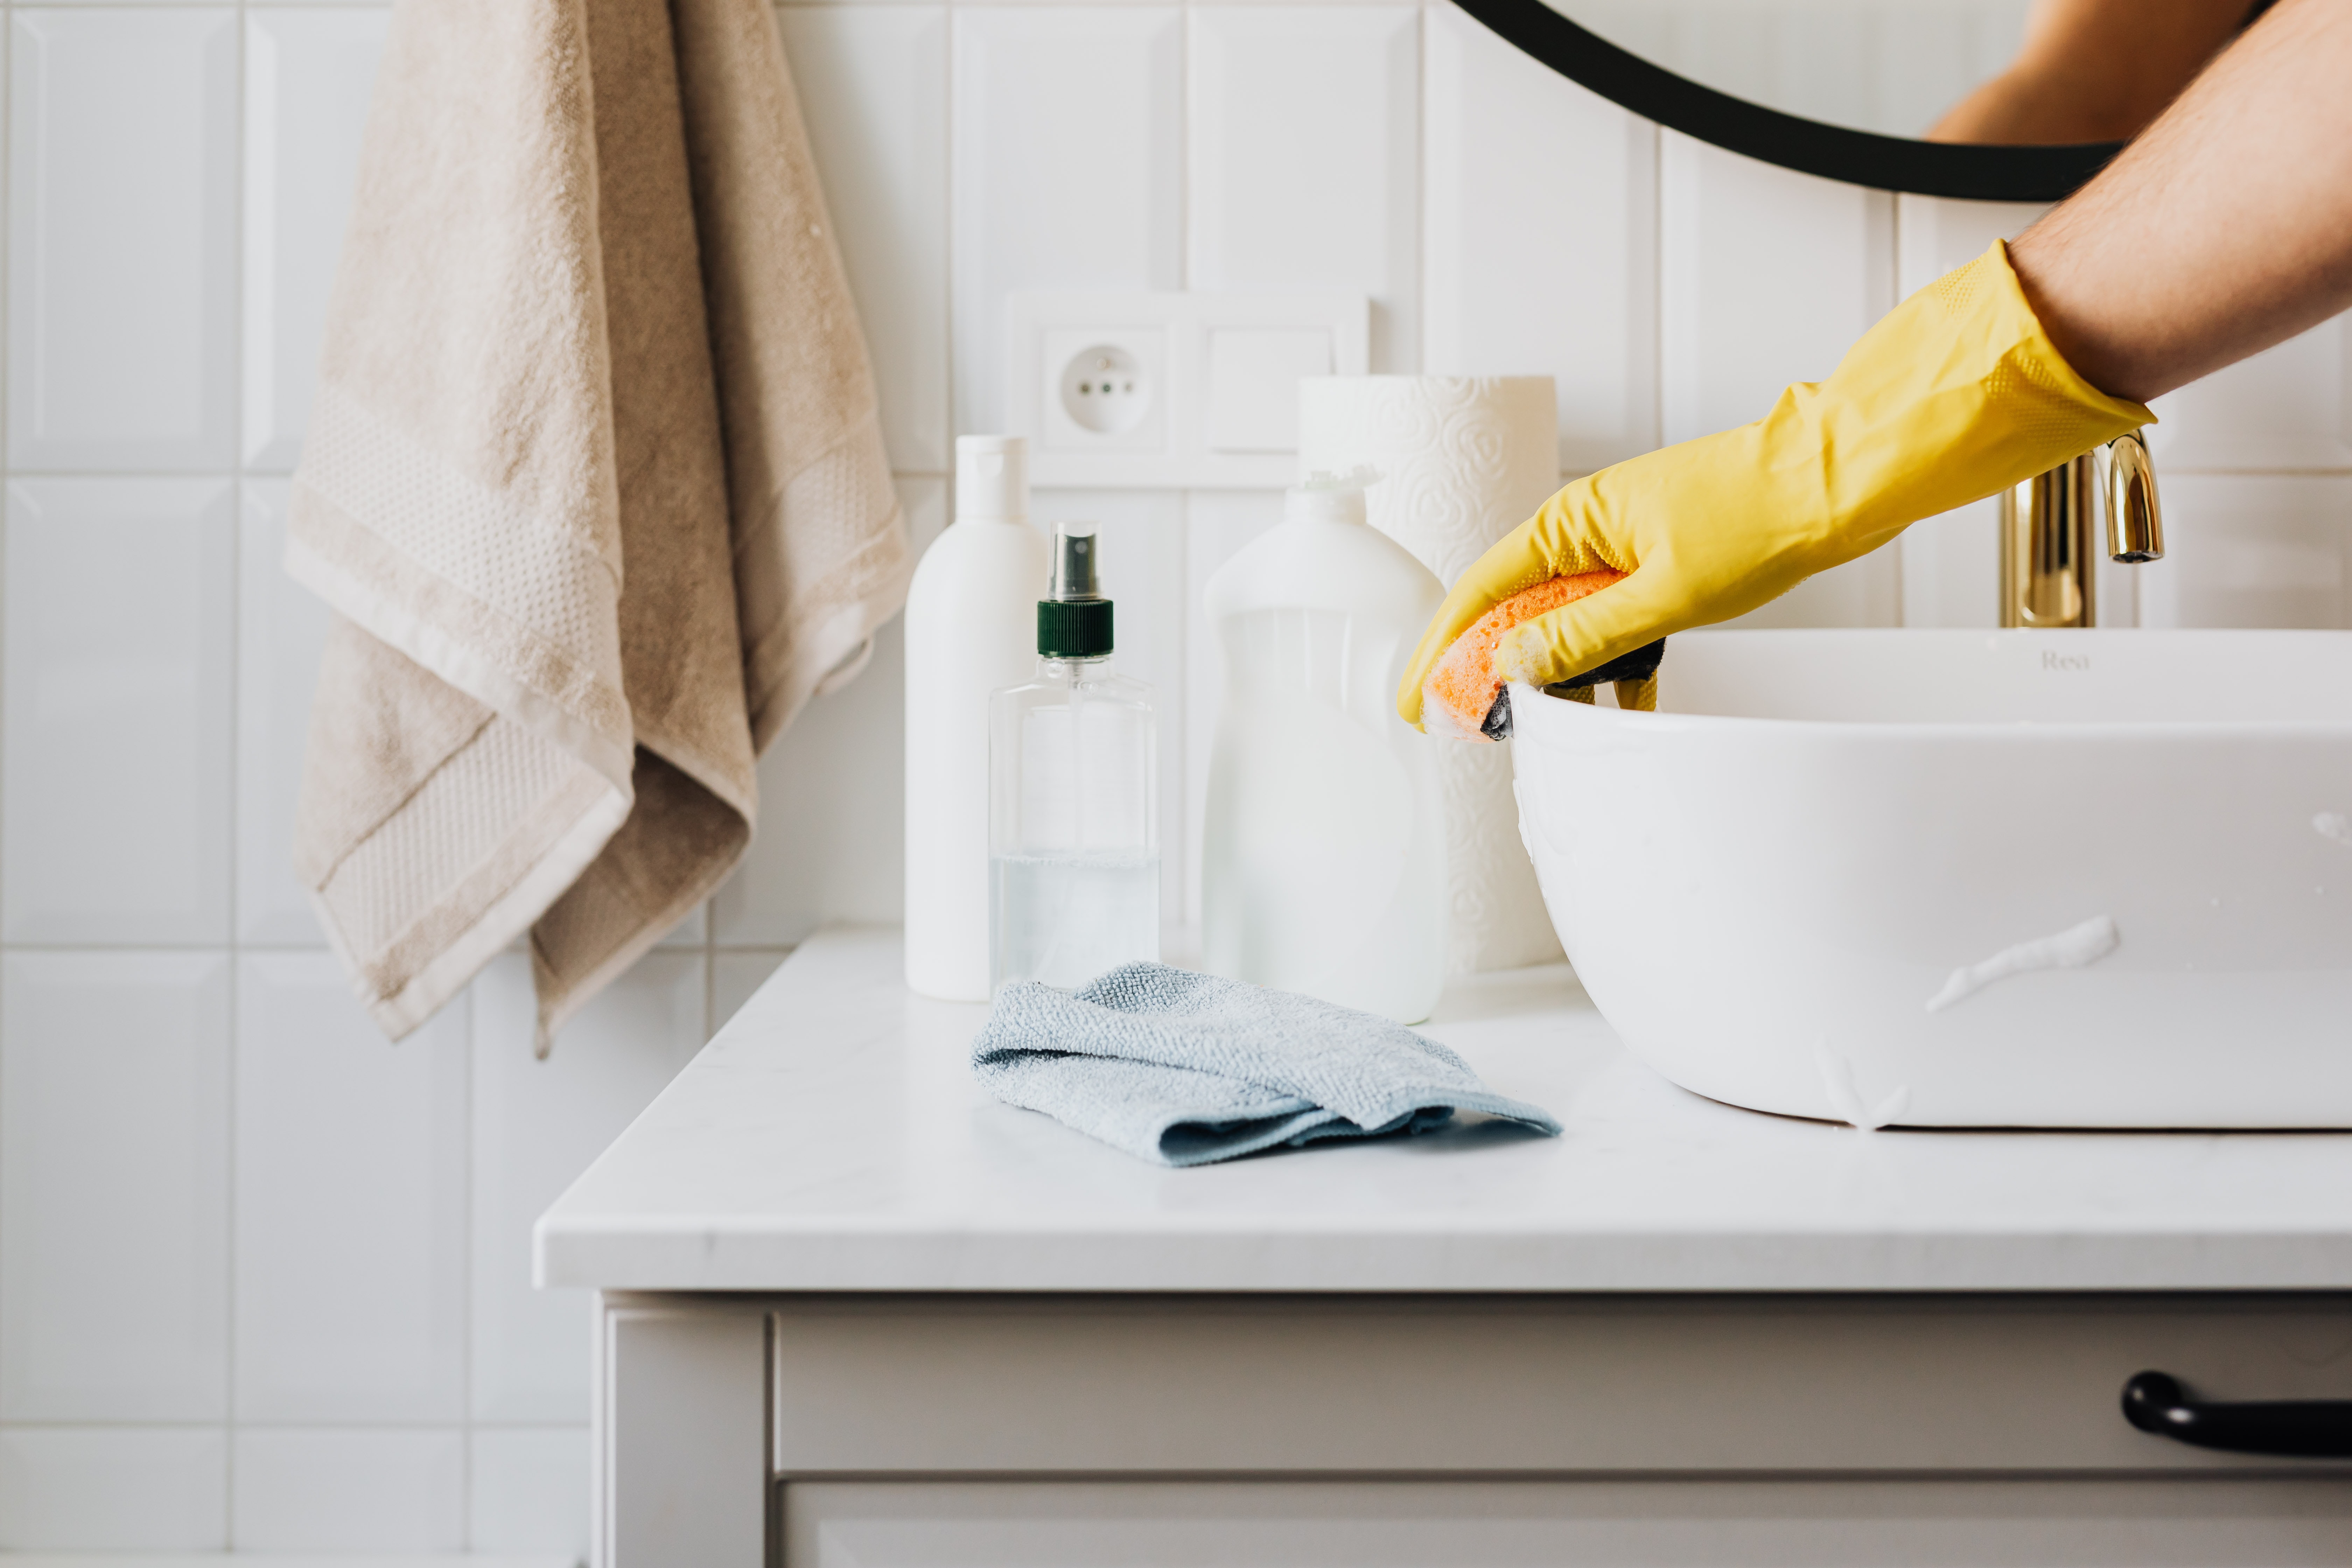 Professional cleaning services Noida. We offer reliable, efficient, and hygienic cleaning services for residential establishments in Noida